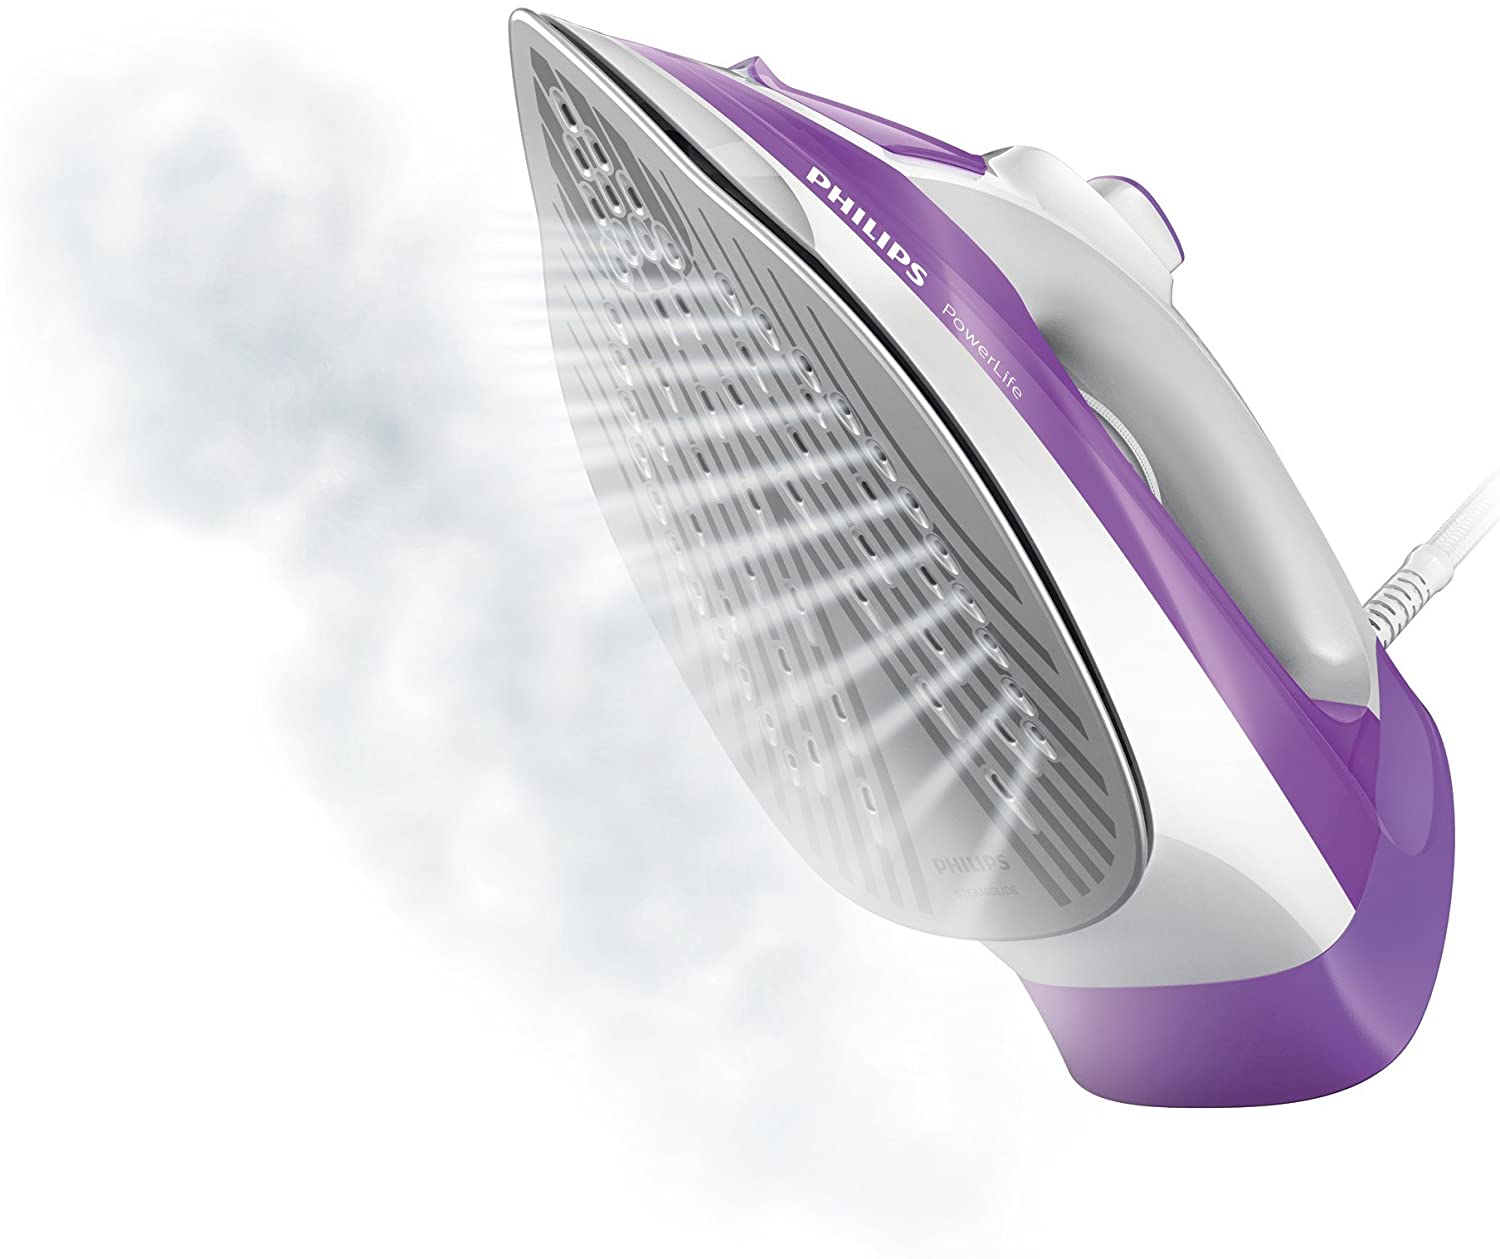 Philips Power Life Steam iron 2300 W - GC2991 | reliable performance | lightweight | variable steam settings | safety features | stylish | even heat distribution | Halabh.com